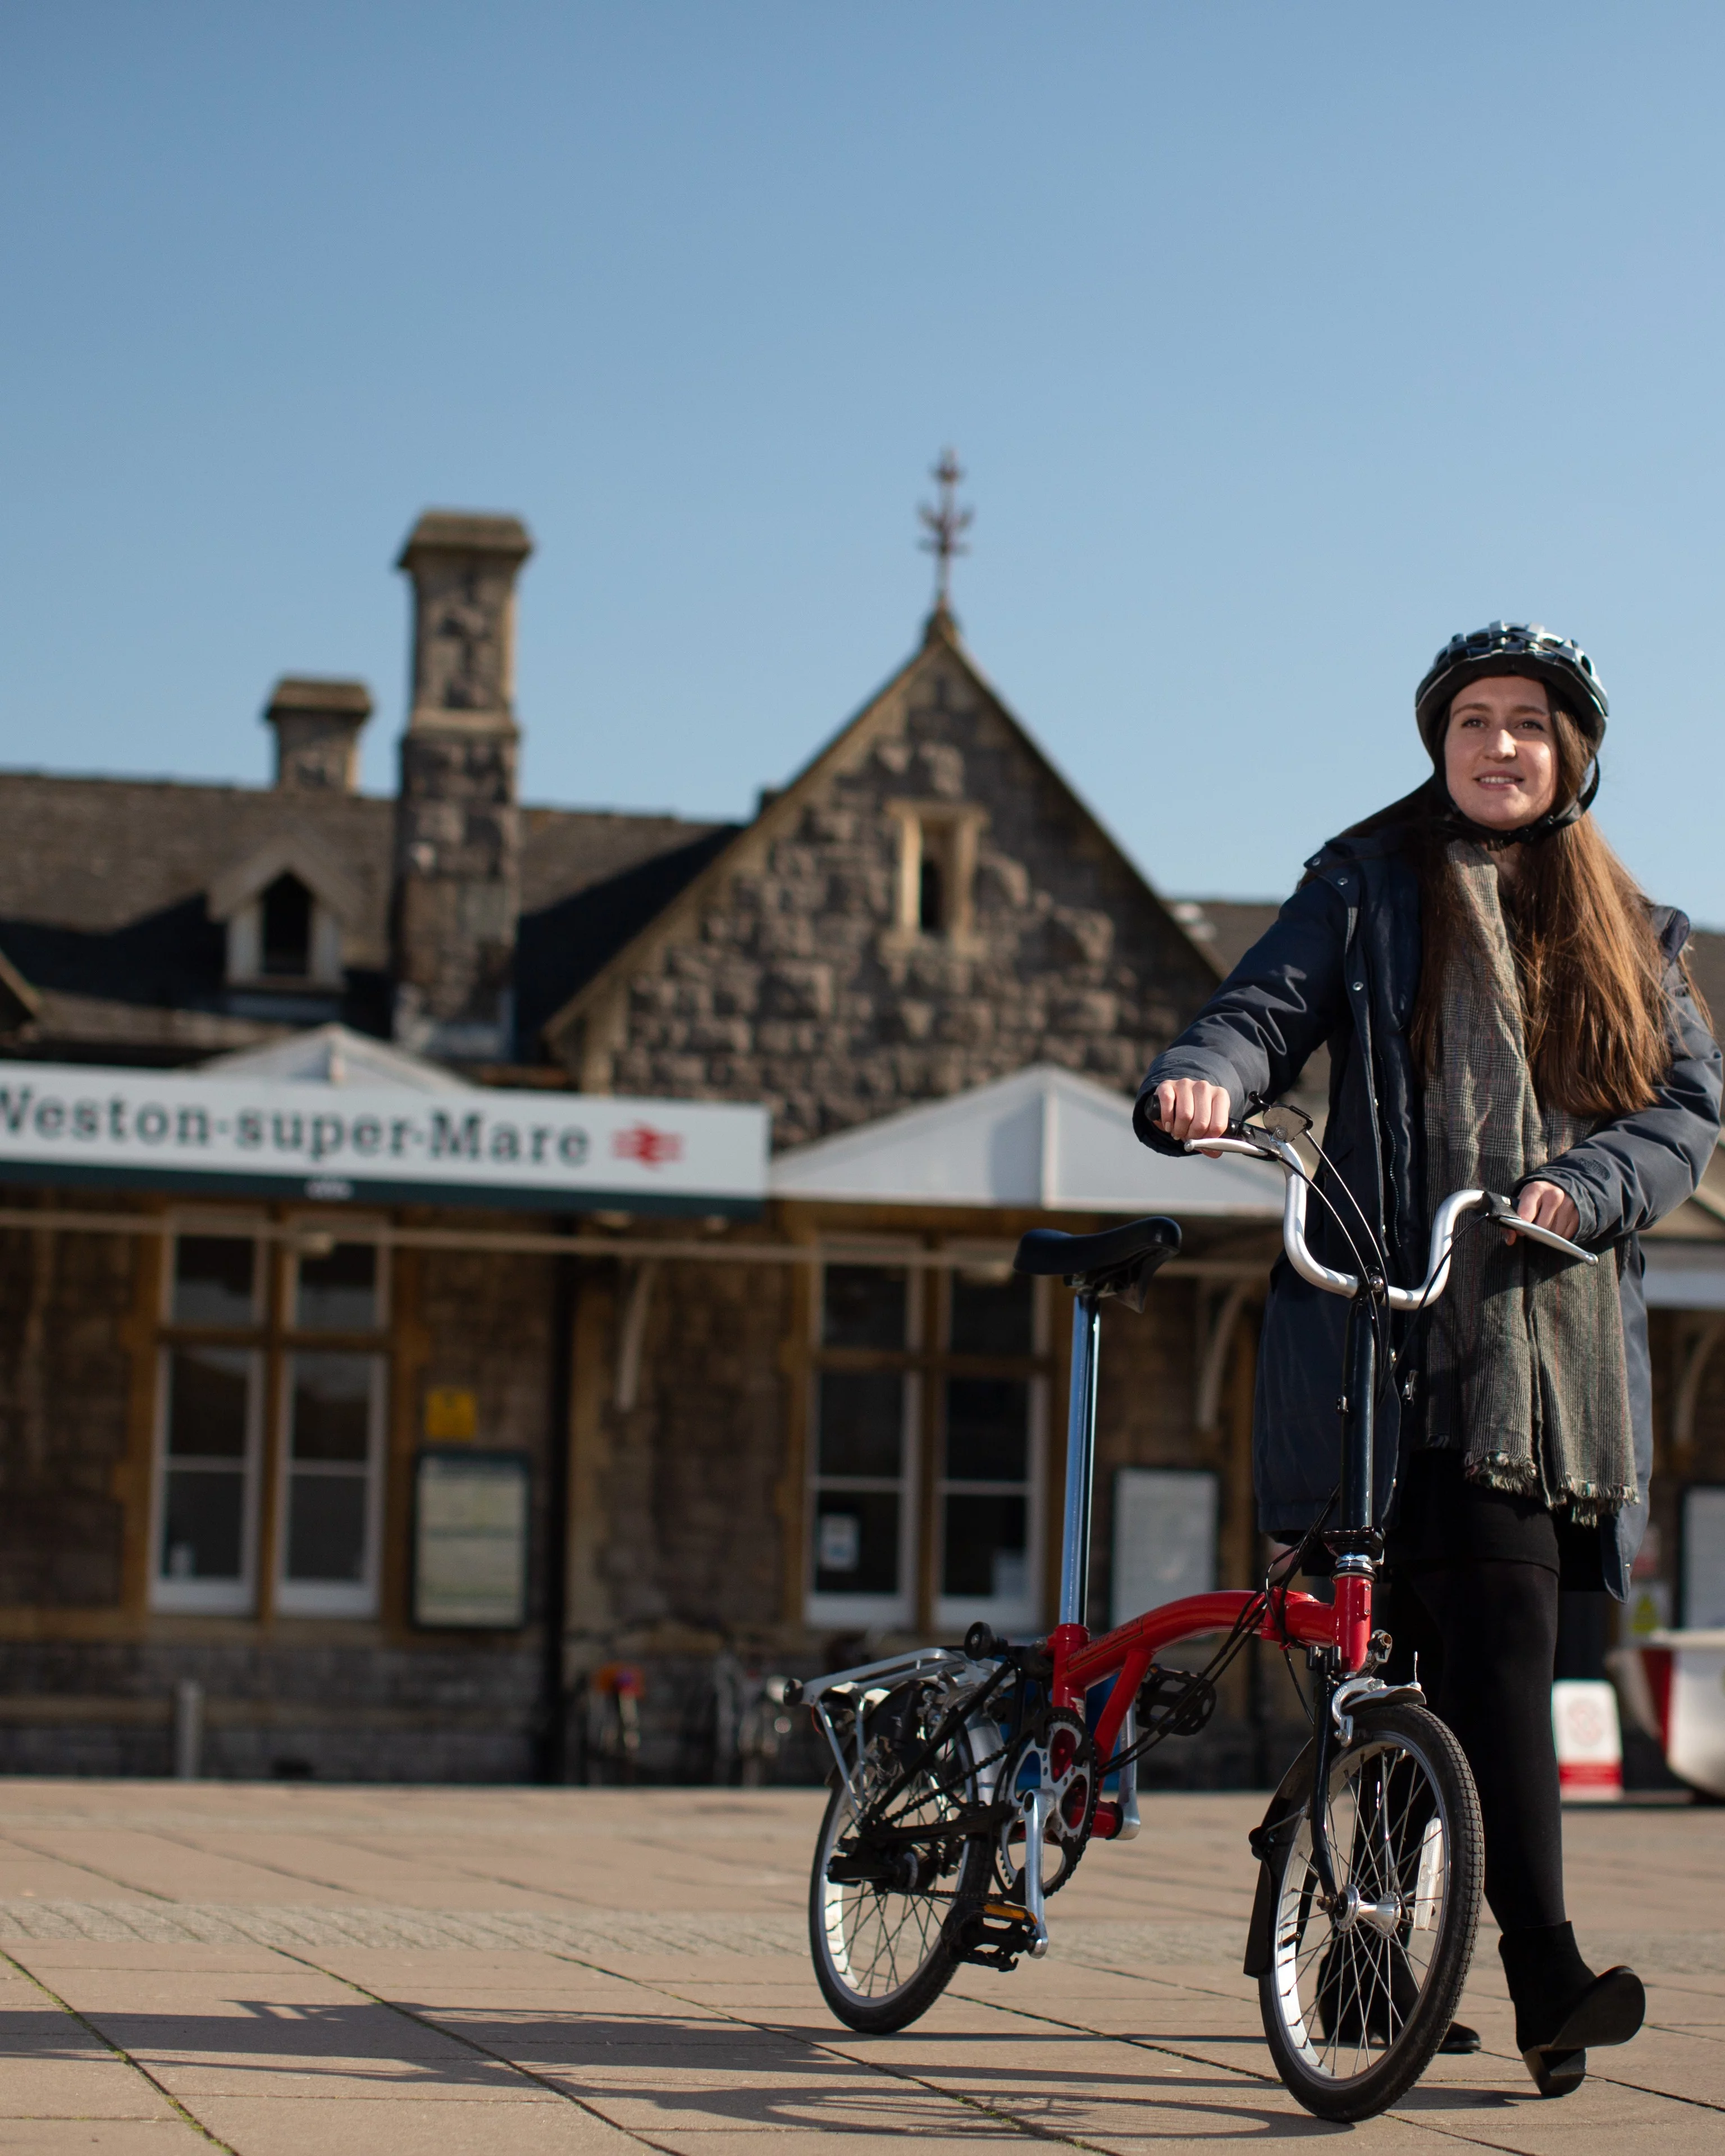 Cycling in Weston-super-Mare, train station